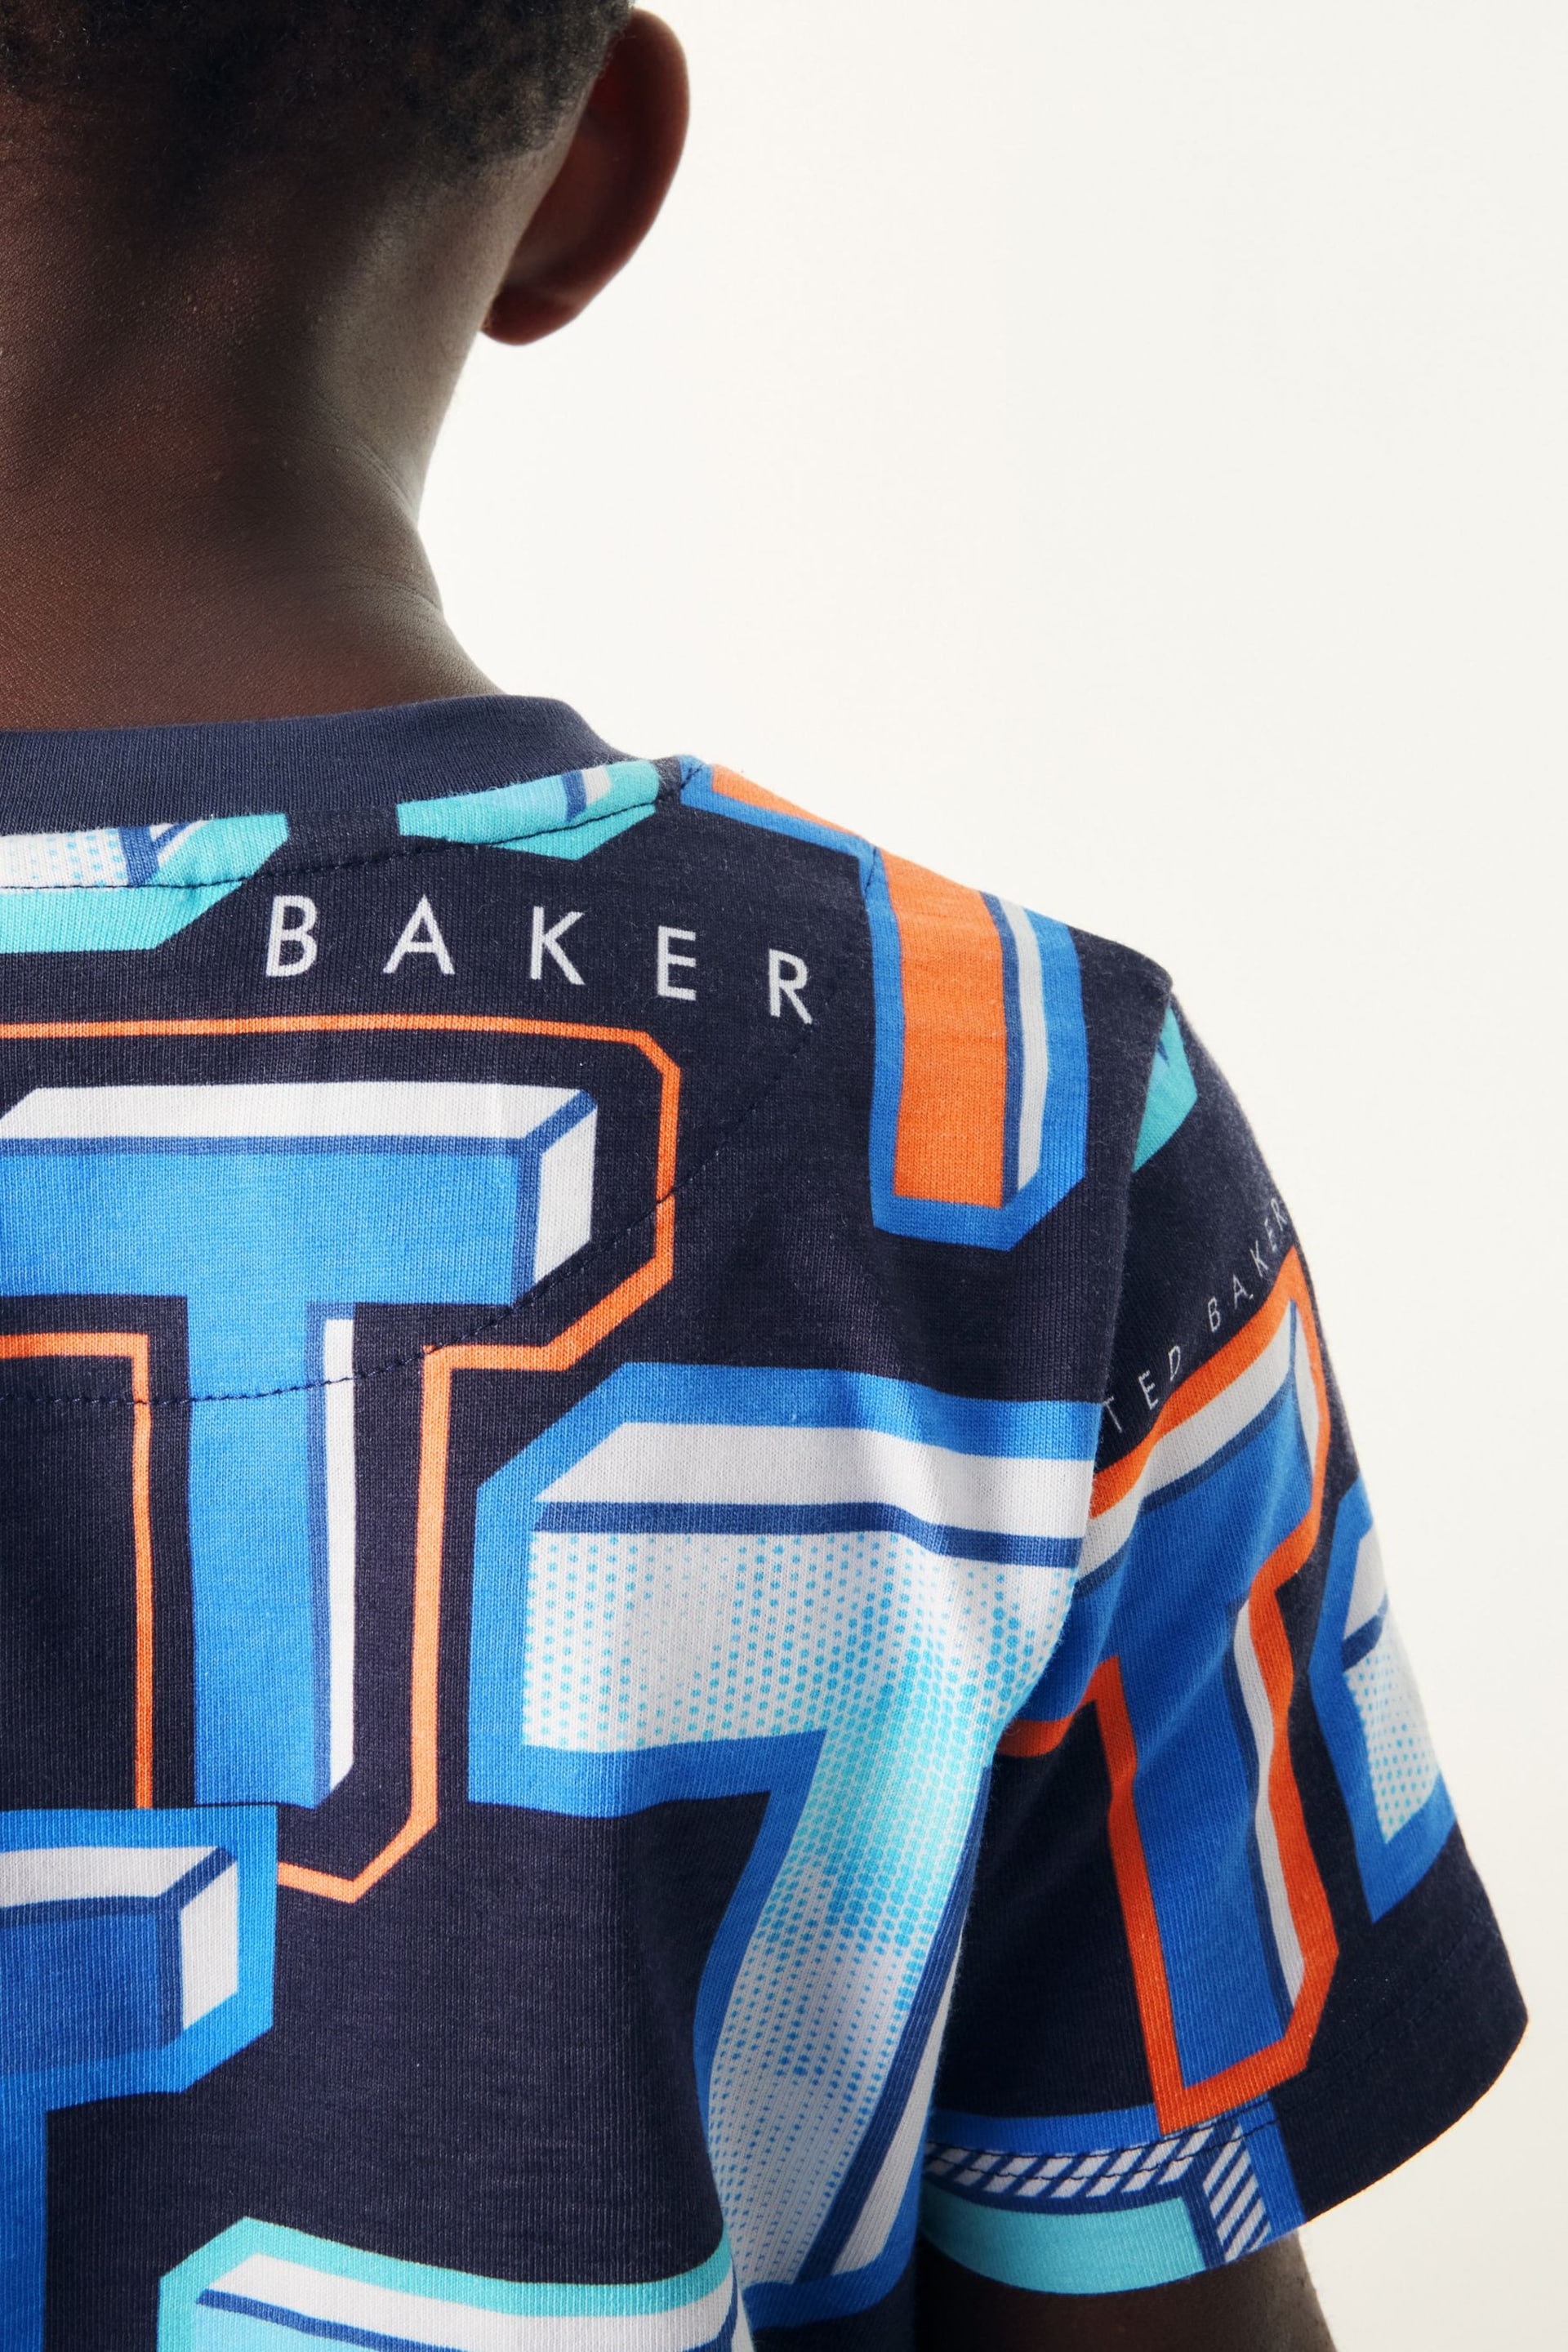 Baker by Ted Baker Graphic T-Shirt - Image 5 of 9